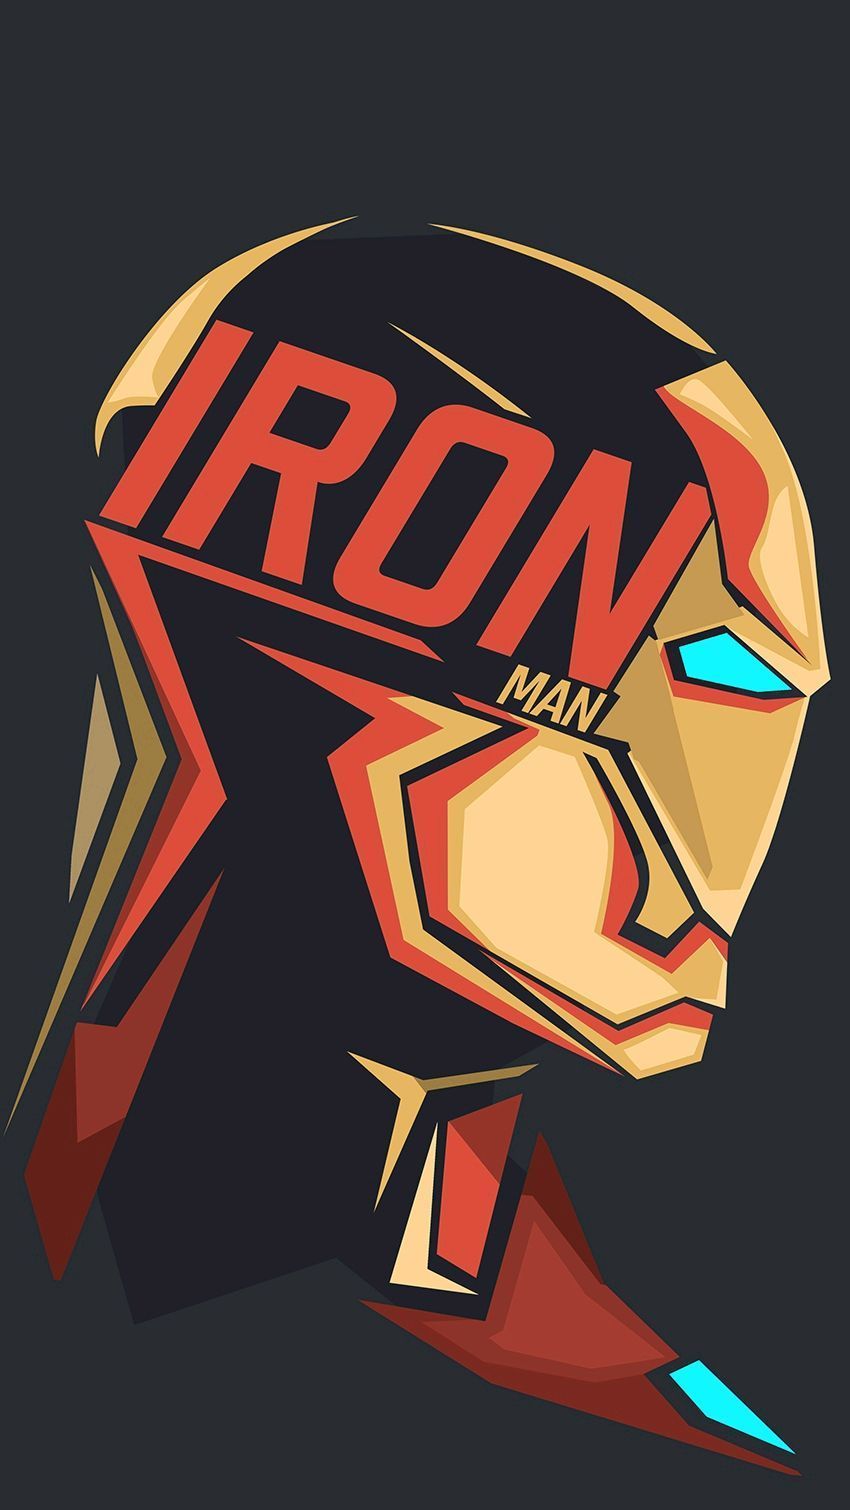 iPhone Wallpaper for iPhone iPhone X and iPhone 7. Marvel heroes, Marvel iron man, Iron man